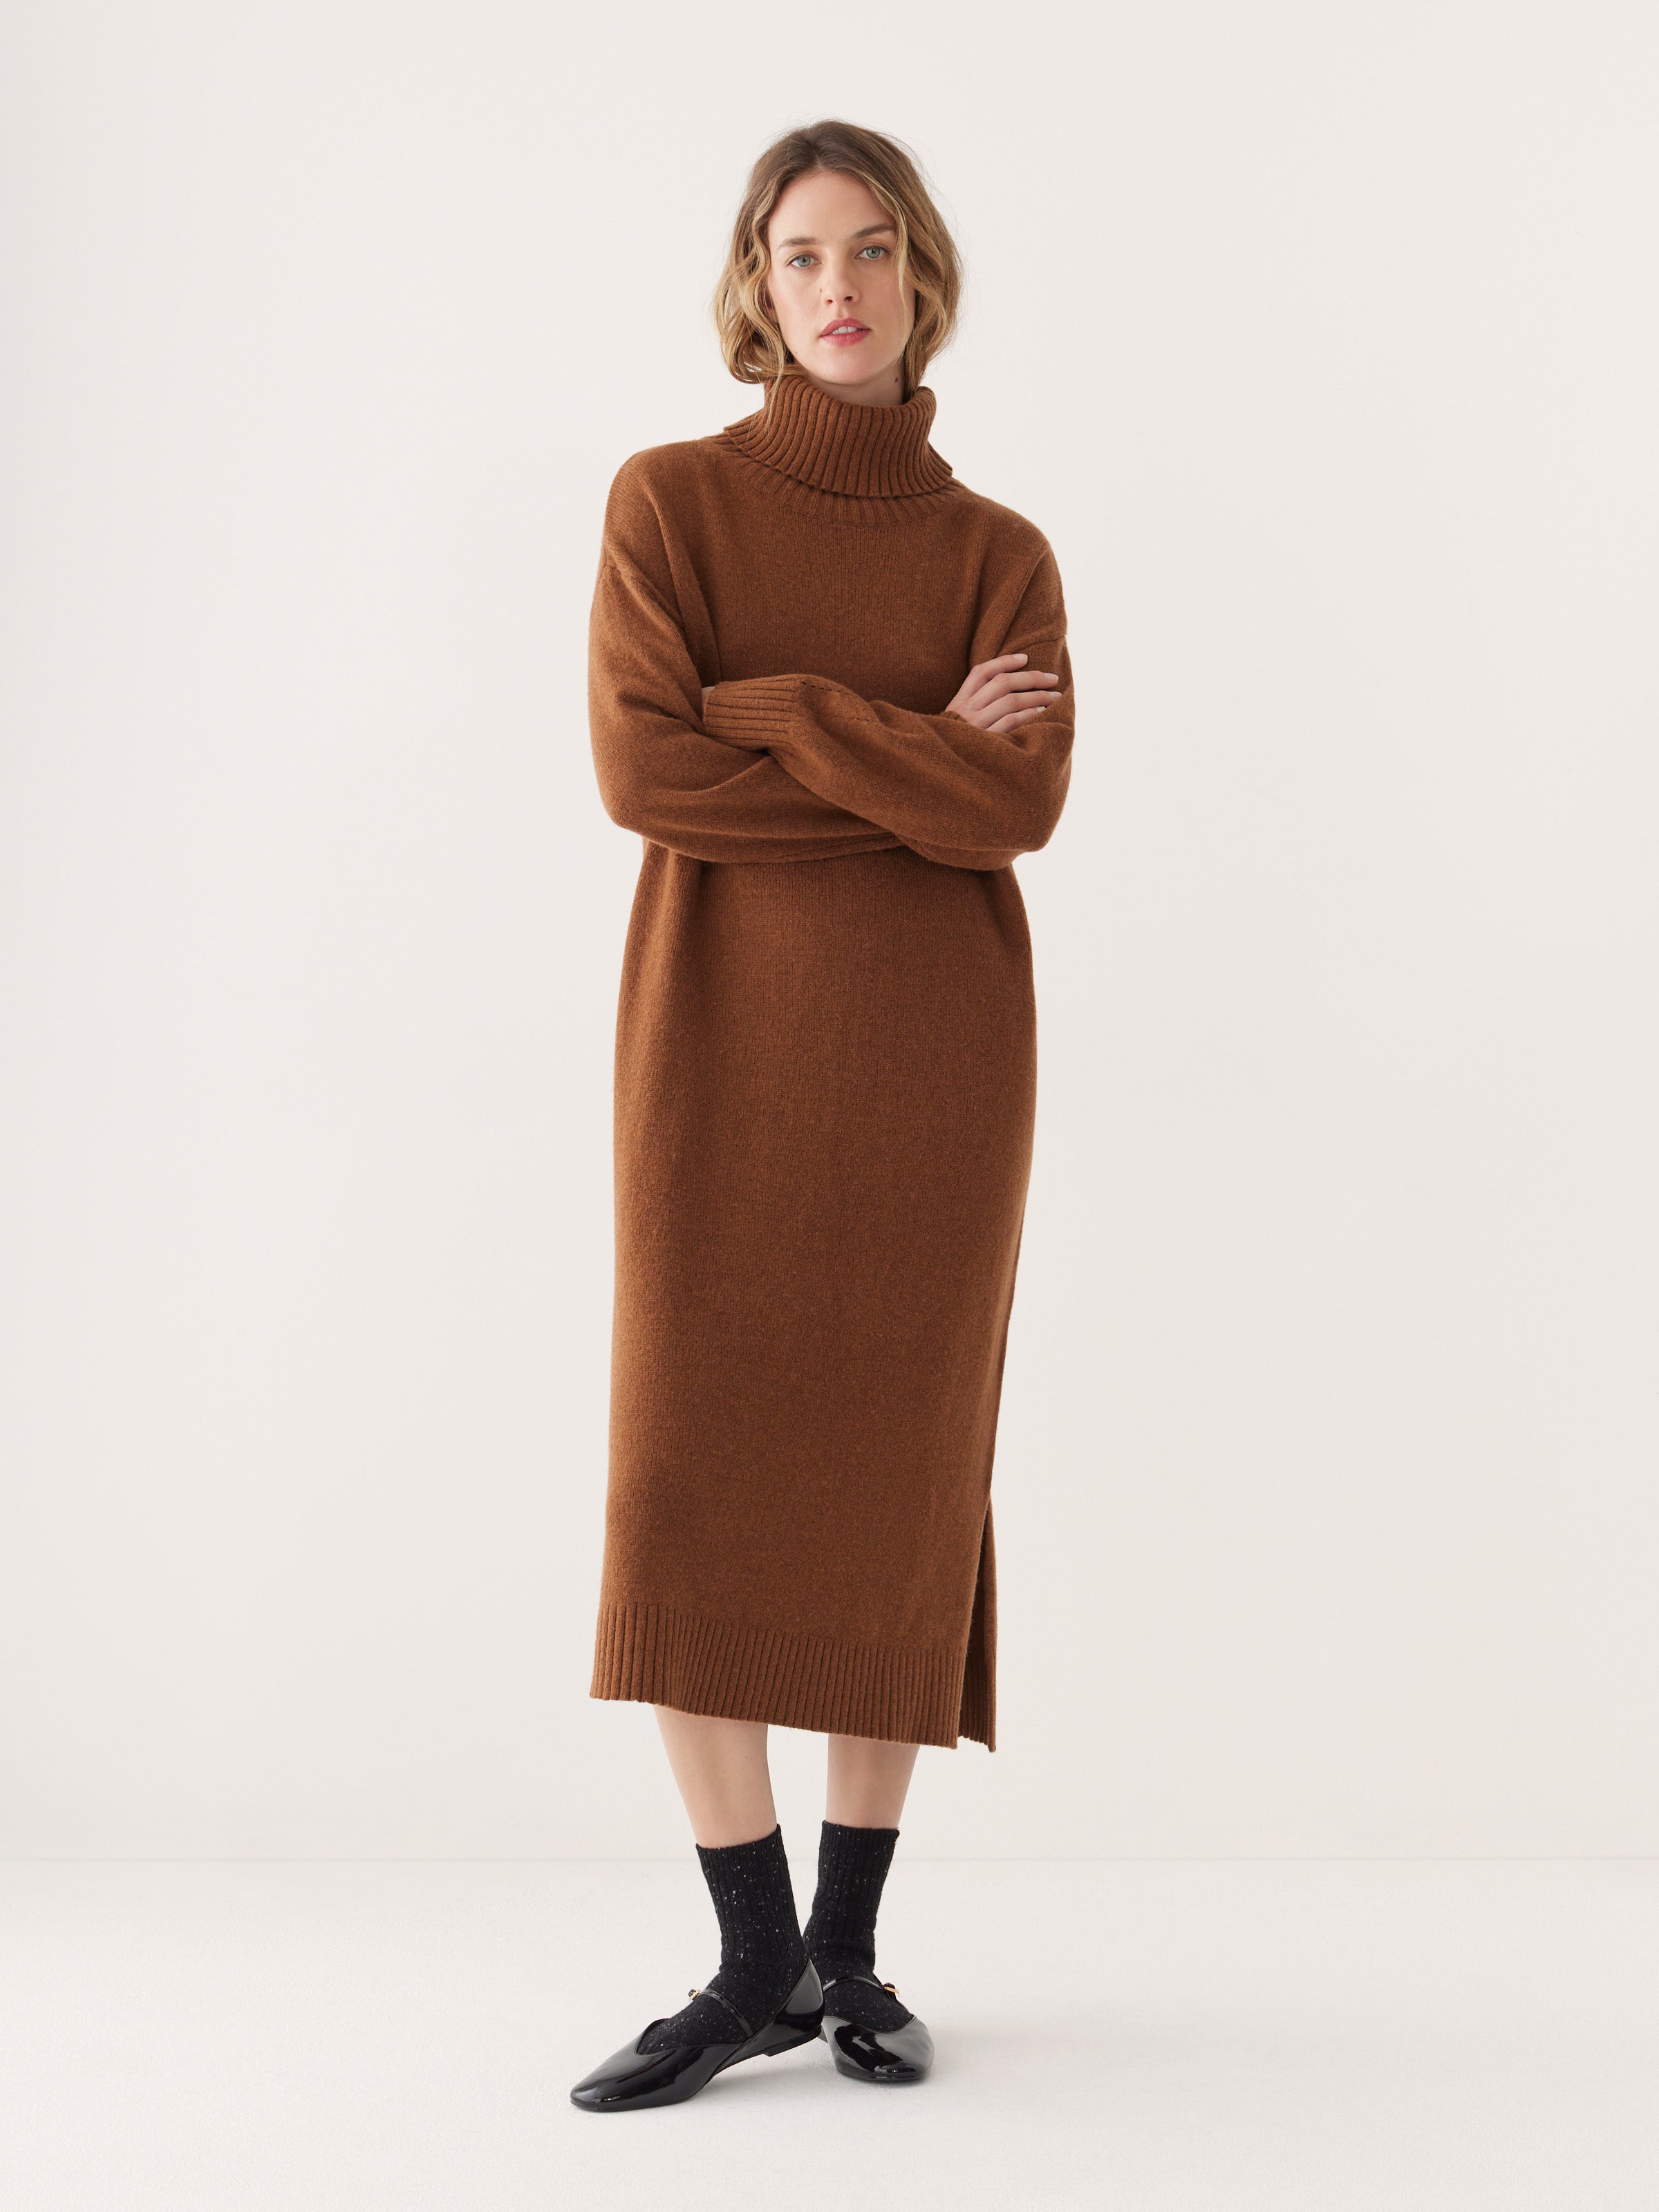 Merino Wool Dresses and Jumpsuits for Women